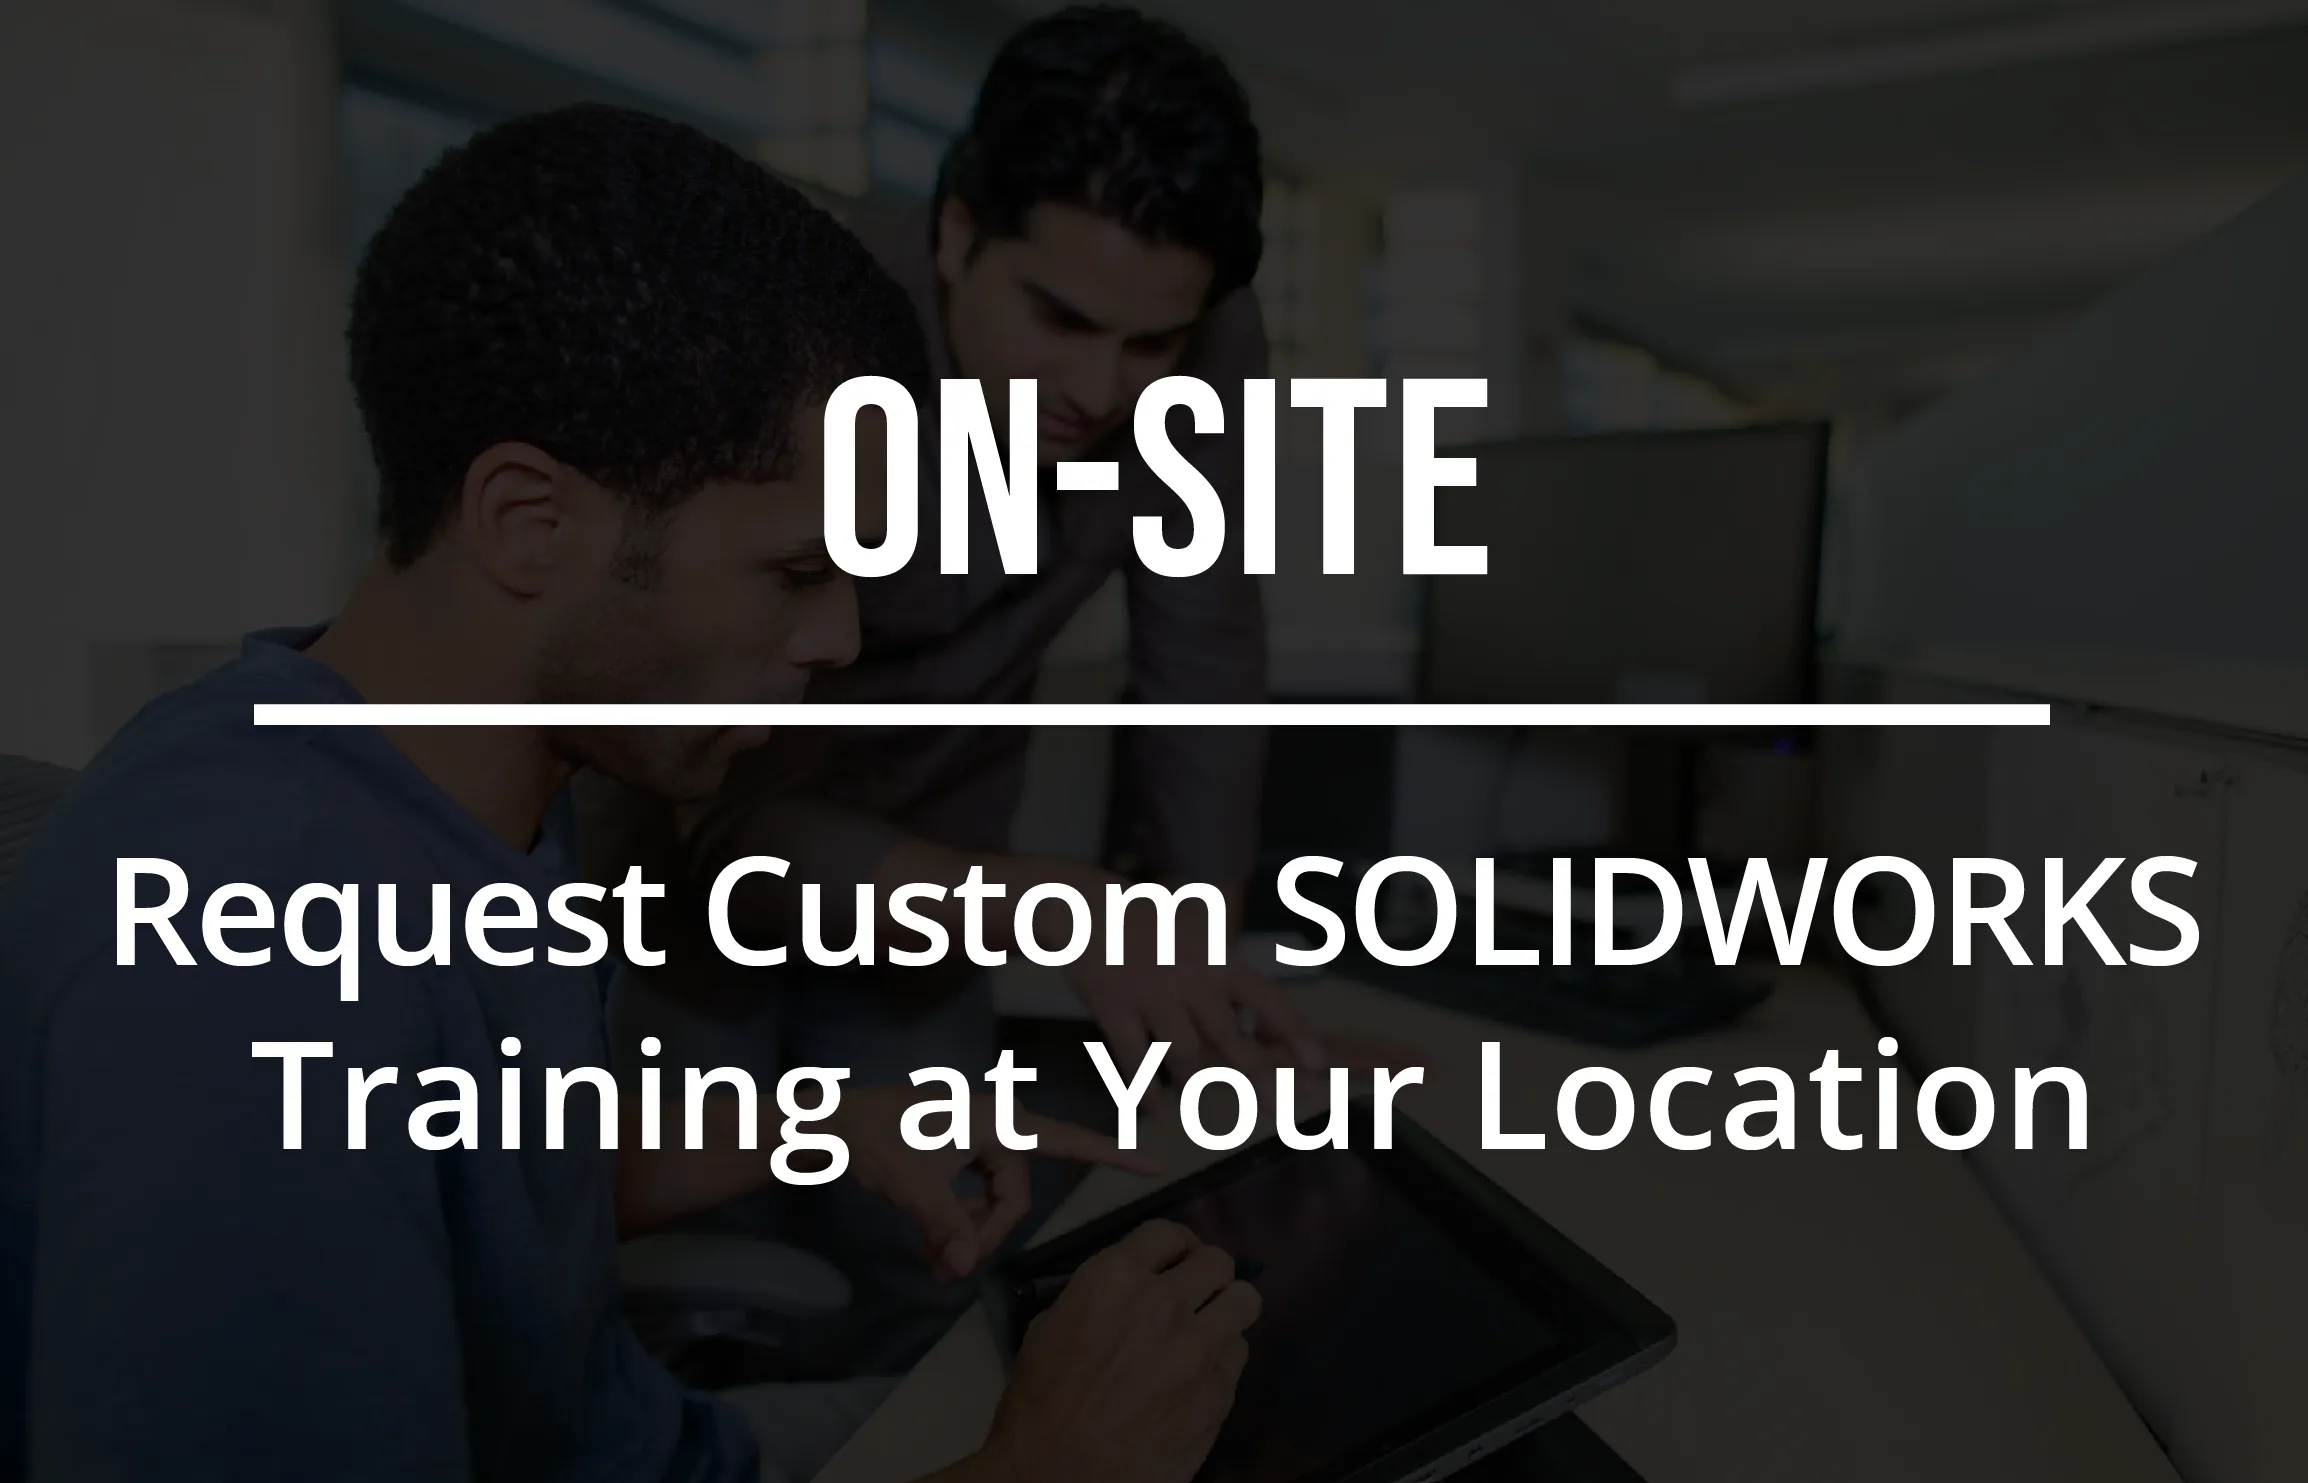 Onsite SOLIDWORKS Training Request Training at your Location GoEngineer